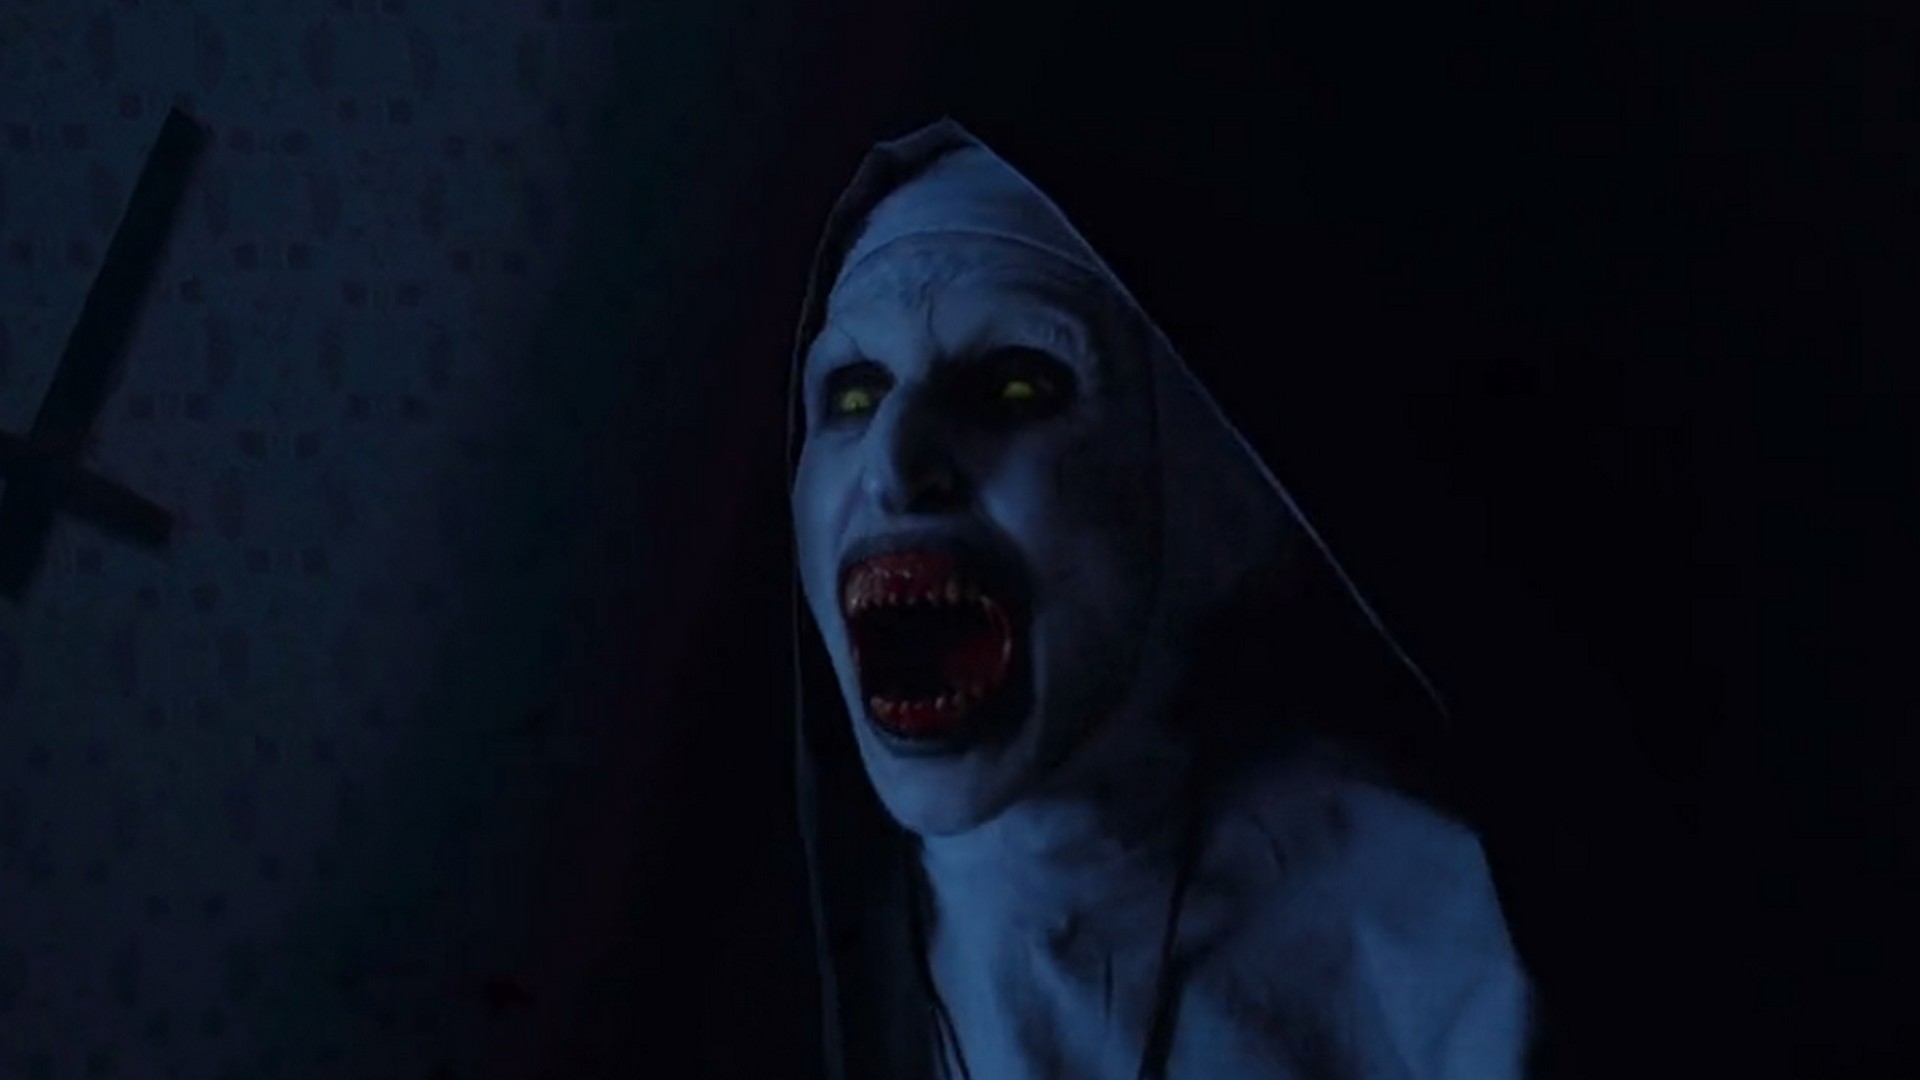 Wallpaper The Nun Valak HD With Resolution 1920X1080 pixel. You can make this wallpaper for your Desktop Computer Backgrounds, Mac Wallpapers, Android Lock screen or iPhone Screensavers